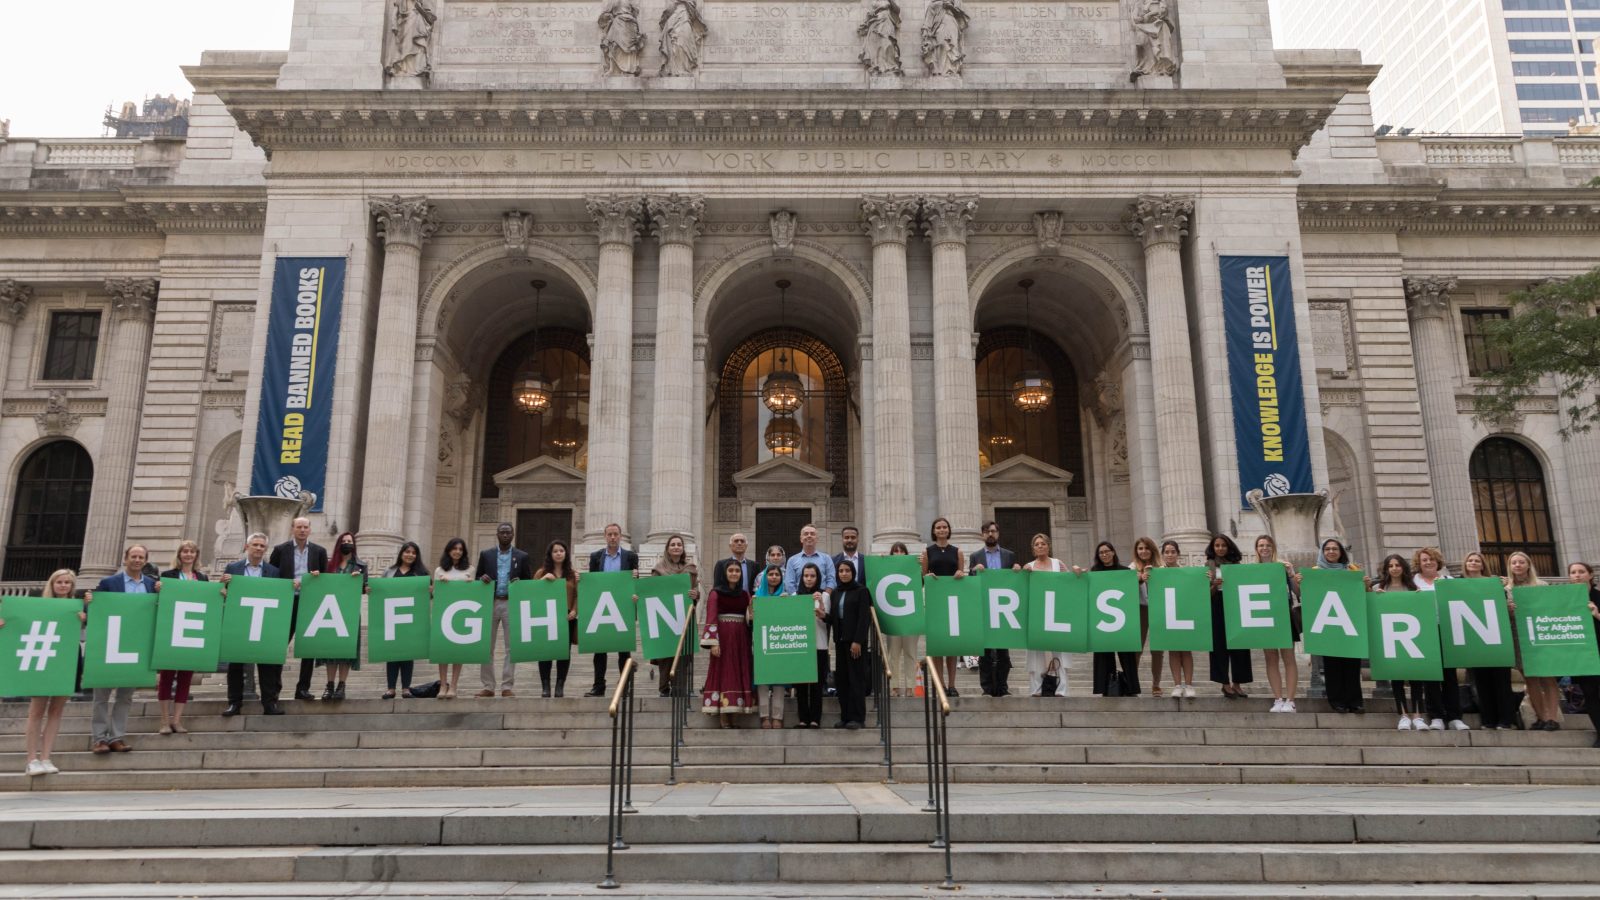 Women holding individual signs with green letters in front of an old building spelling out 